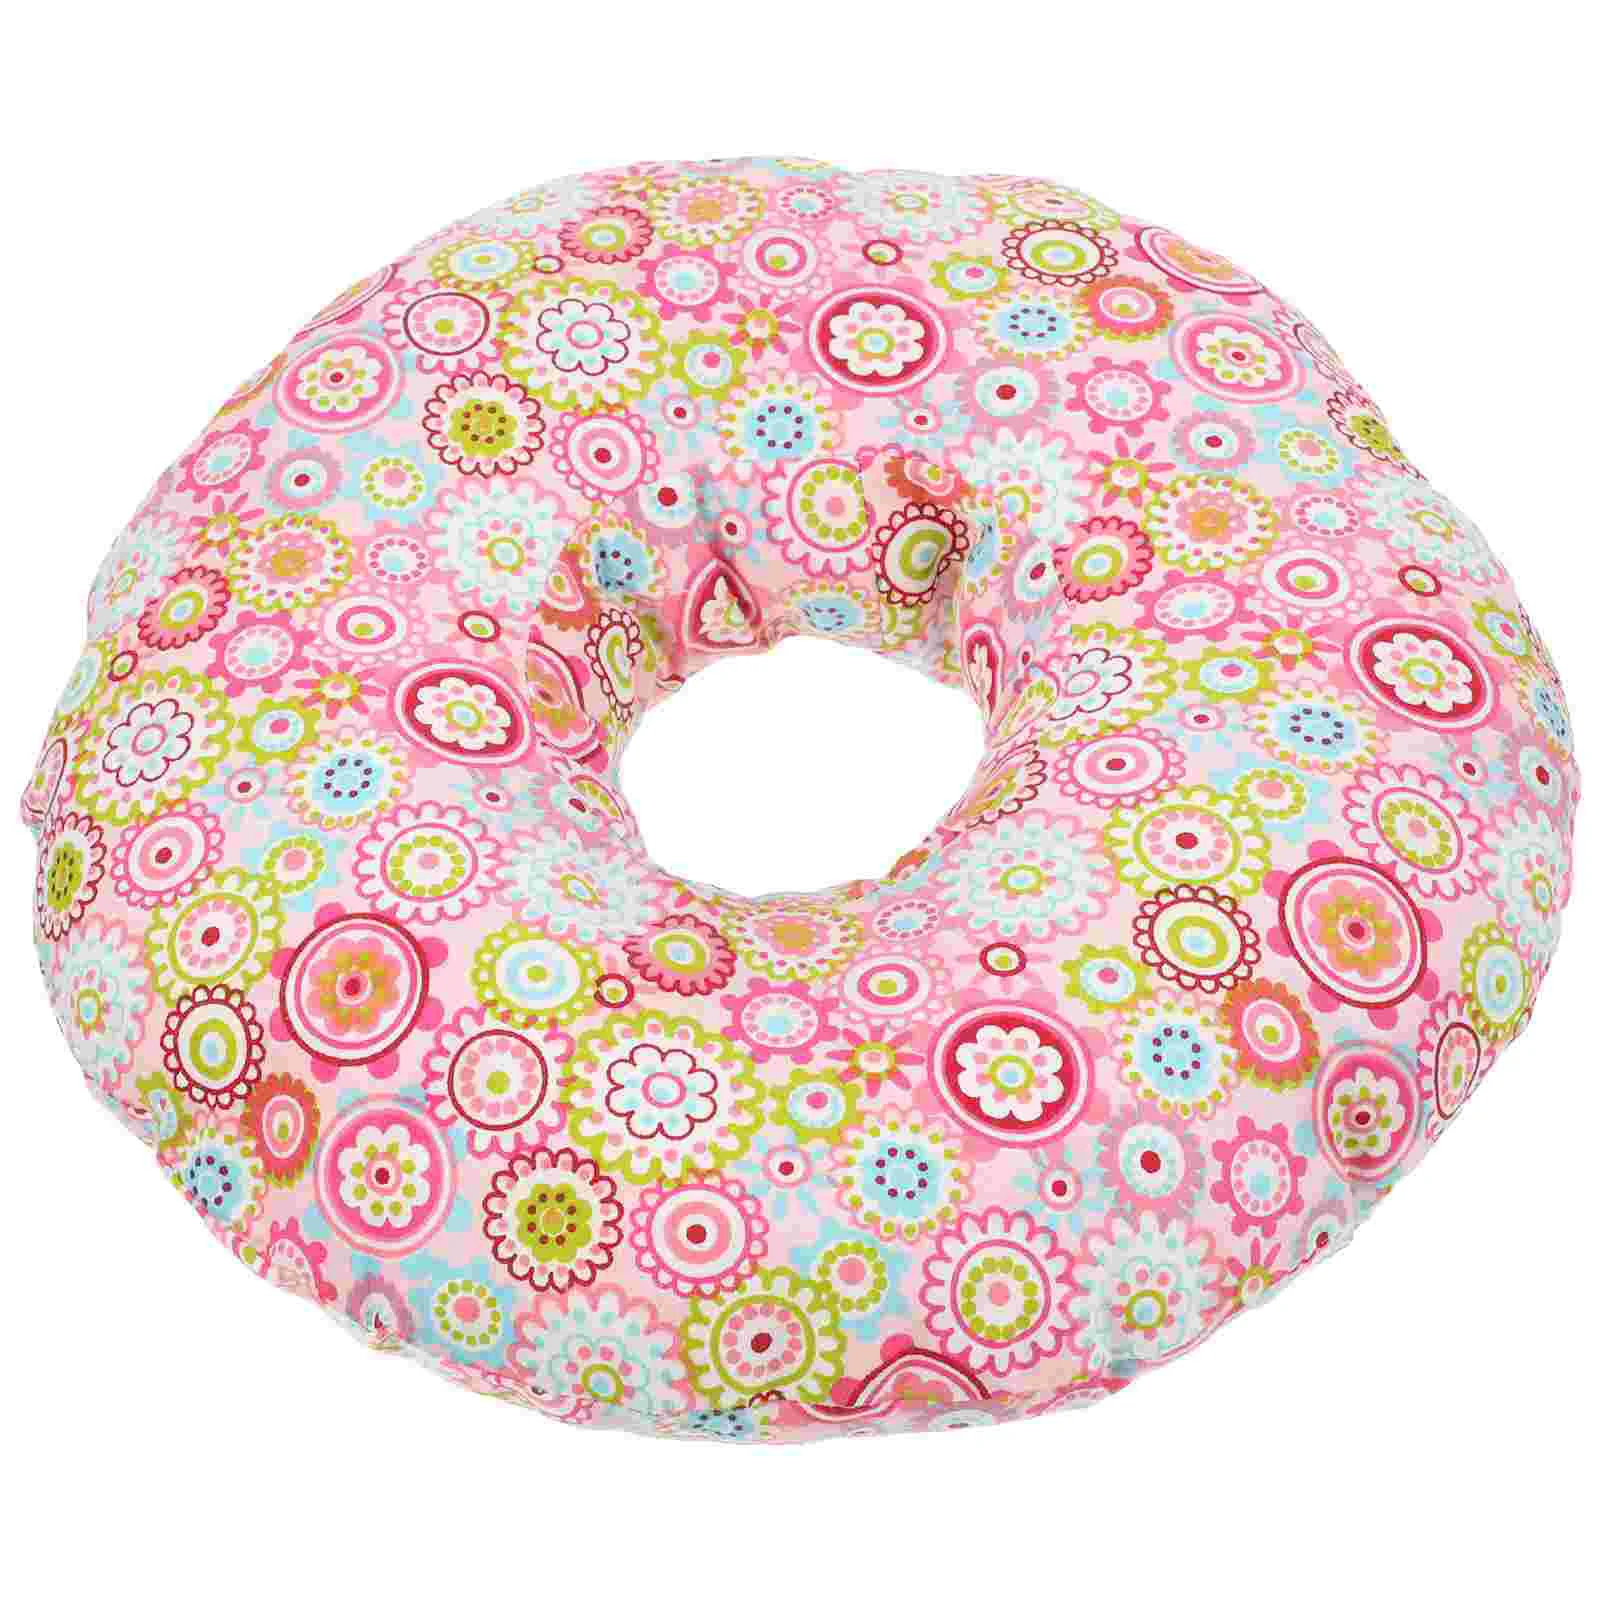 Plush Pillows Pressure Sores Portable Donut Donuts Stuffed Side Sleeping Ear Filling